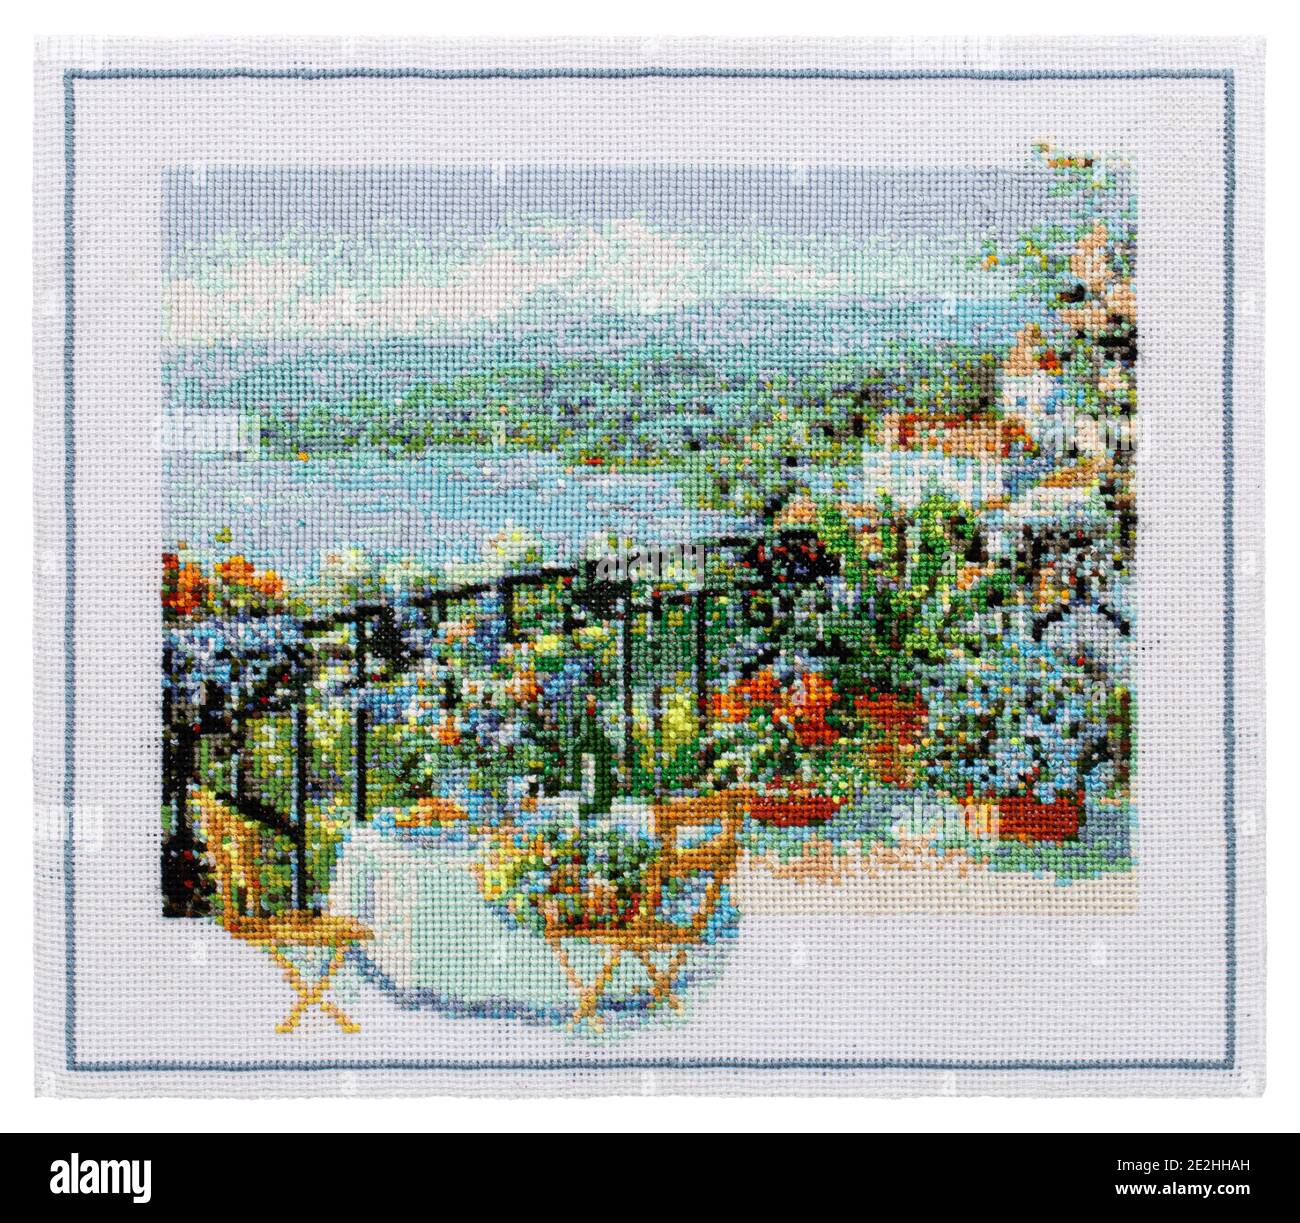 Embroidered picture, outdoor cafe terrace overlooking the sea, cross-stitch on textile canvas, isolated on white background Stock Photo